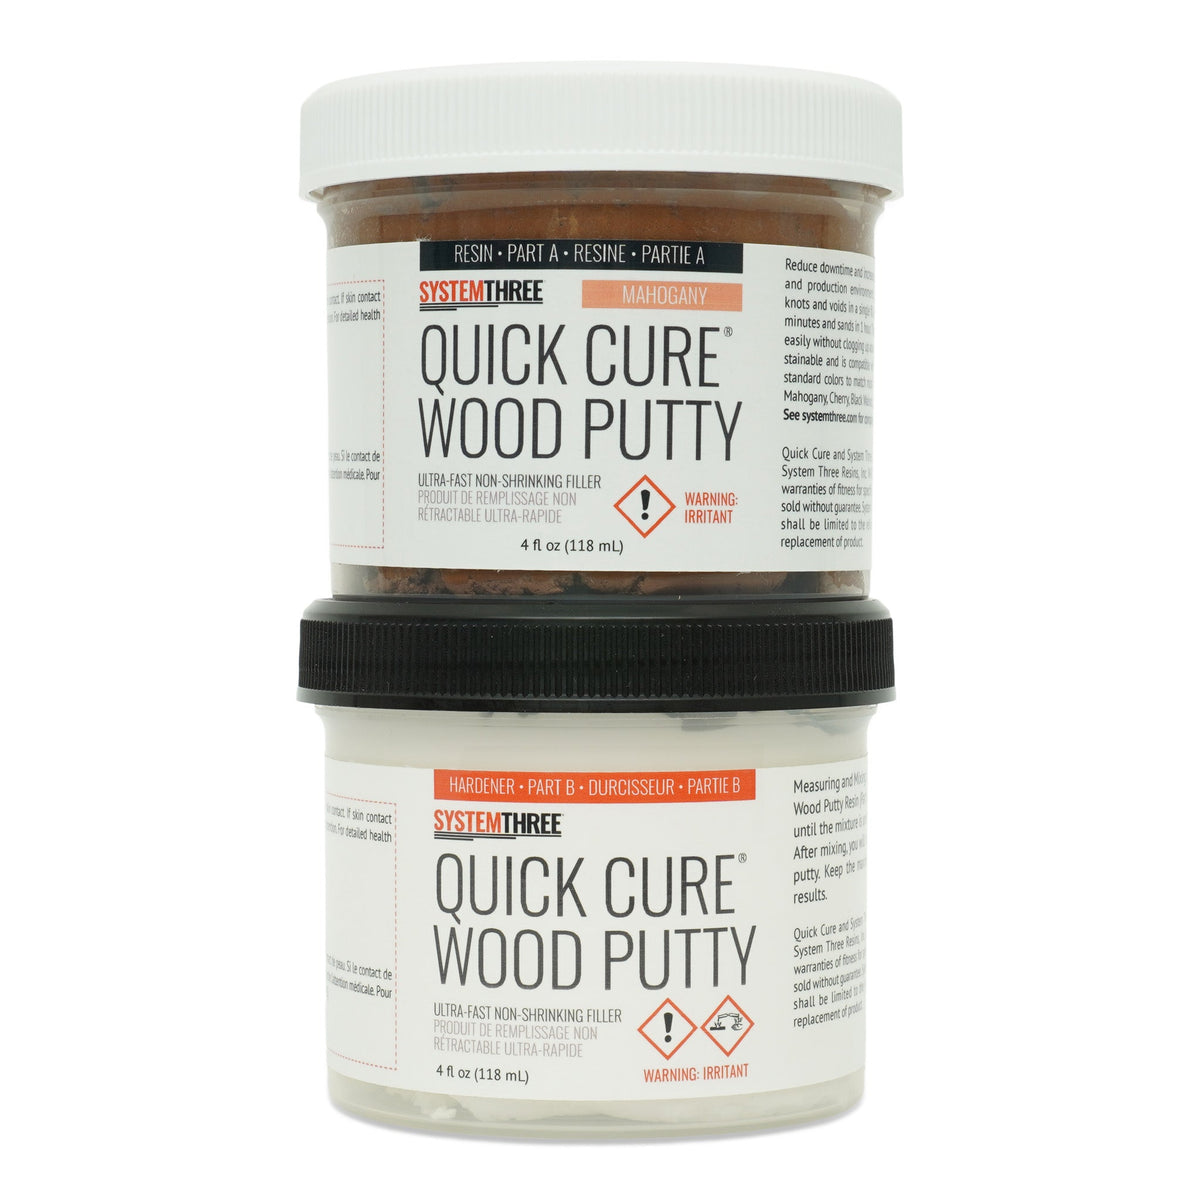 Universal Filler Putty Paste, Quick Drying for Wood, Walls & Plasterboard –  SPC Coatings